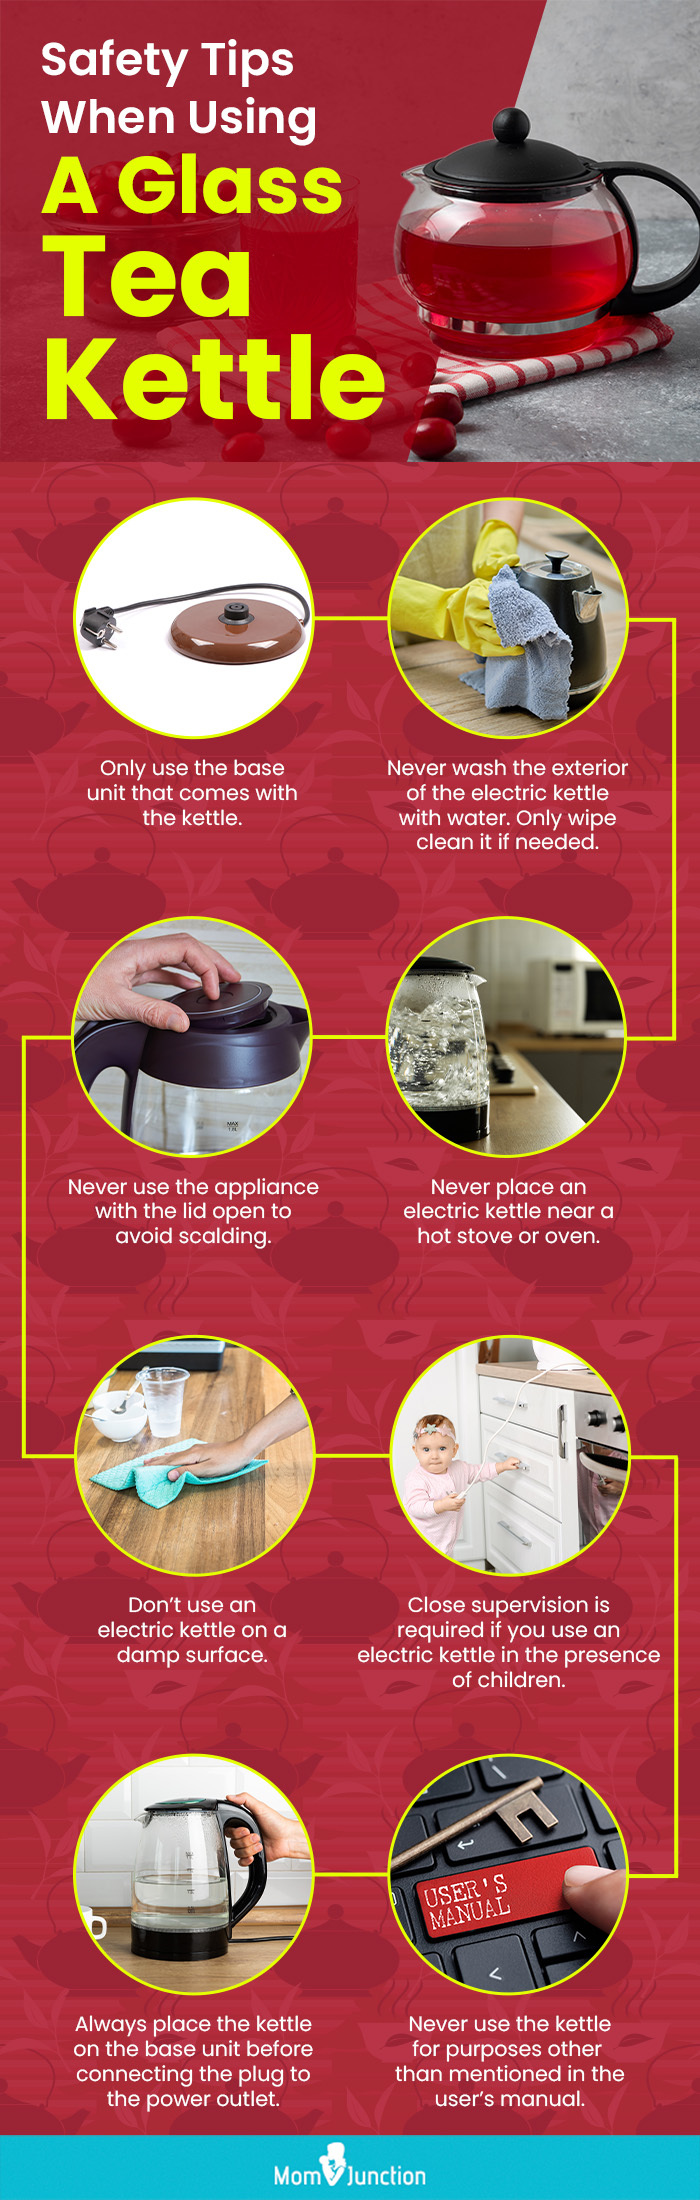 Safety Tips When Using A Glass Tea Kettle (infographic)